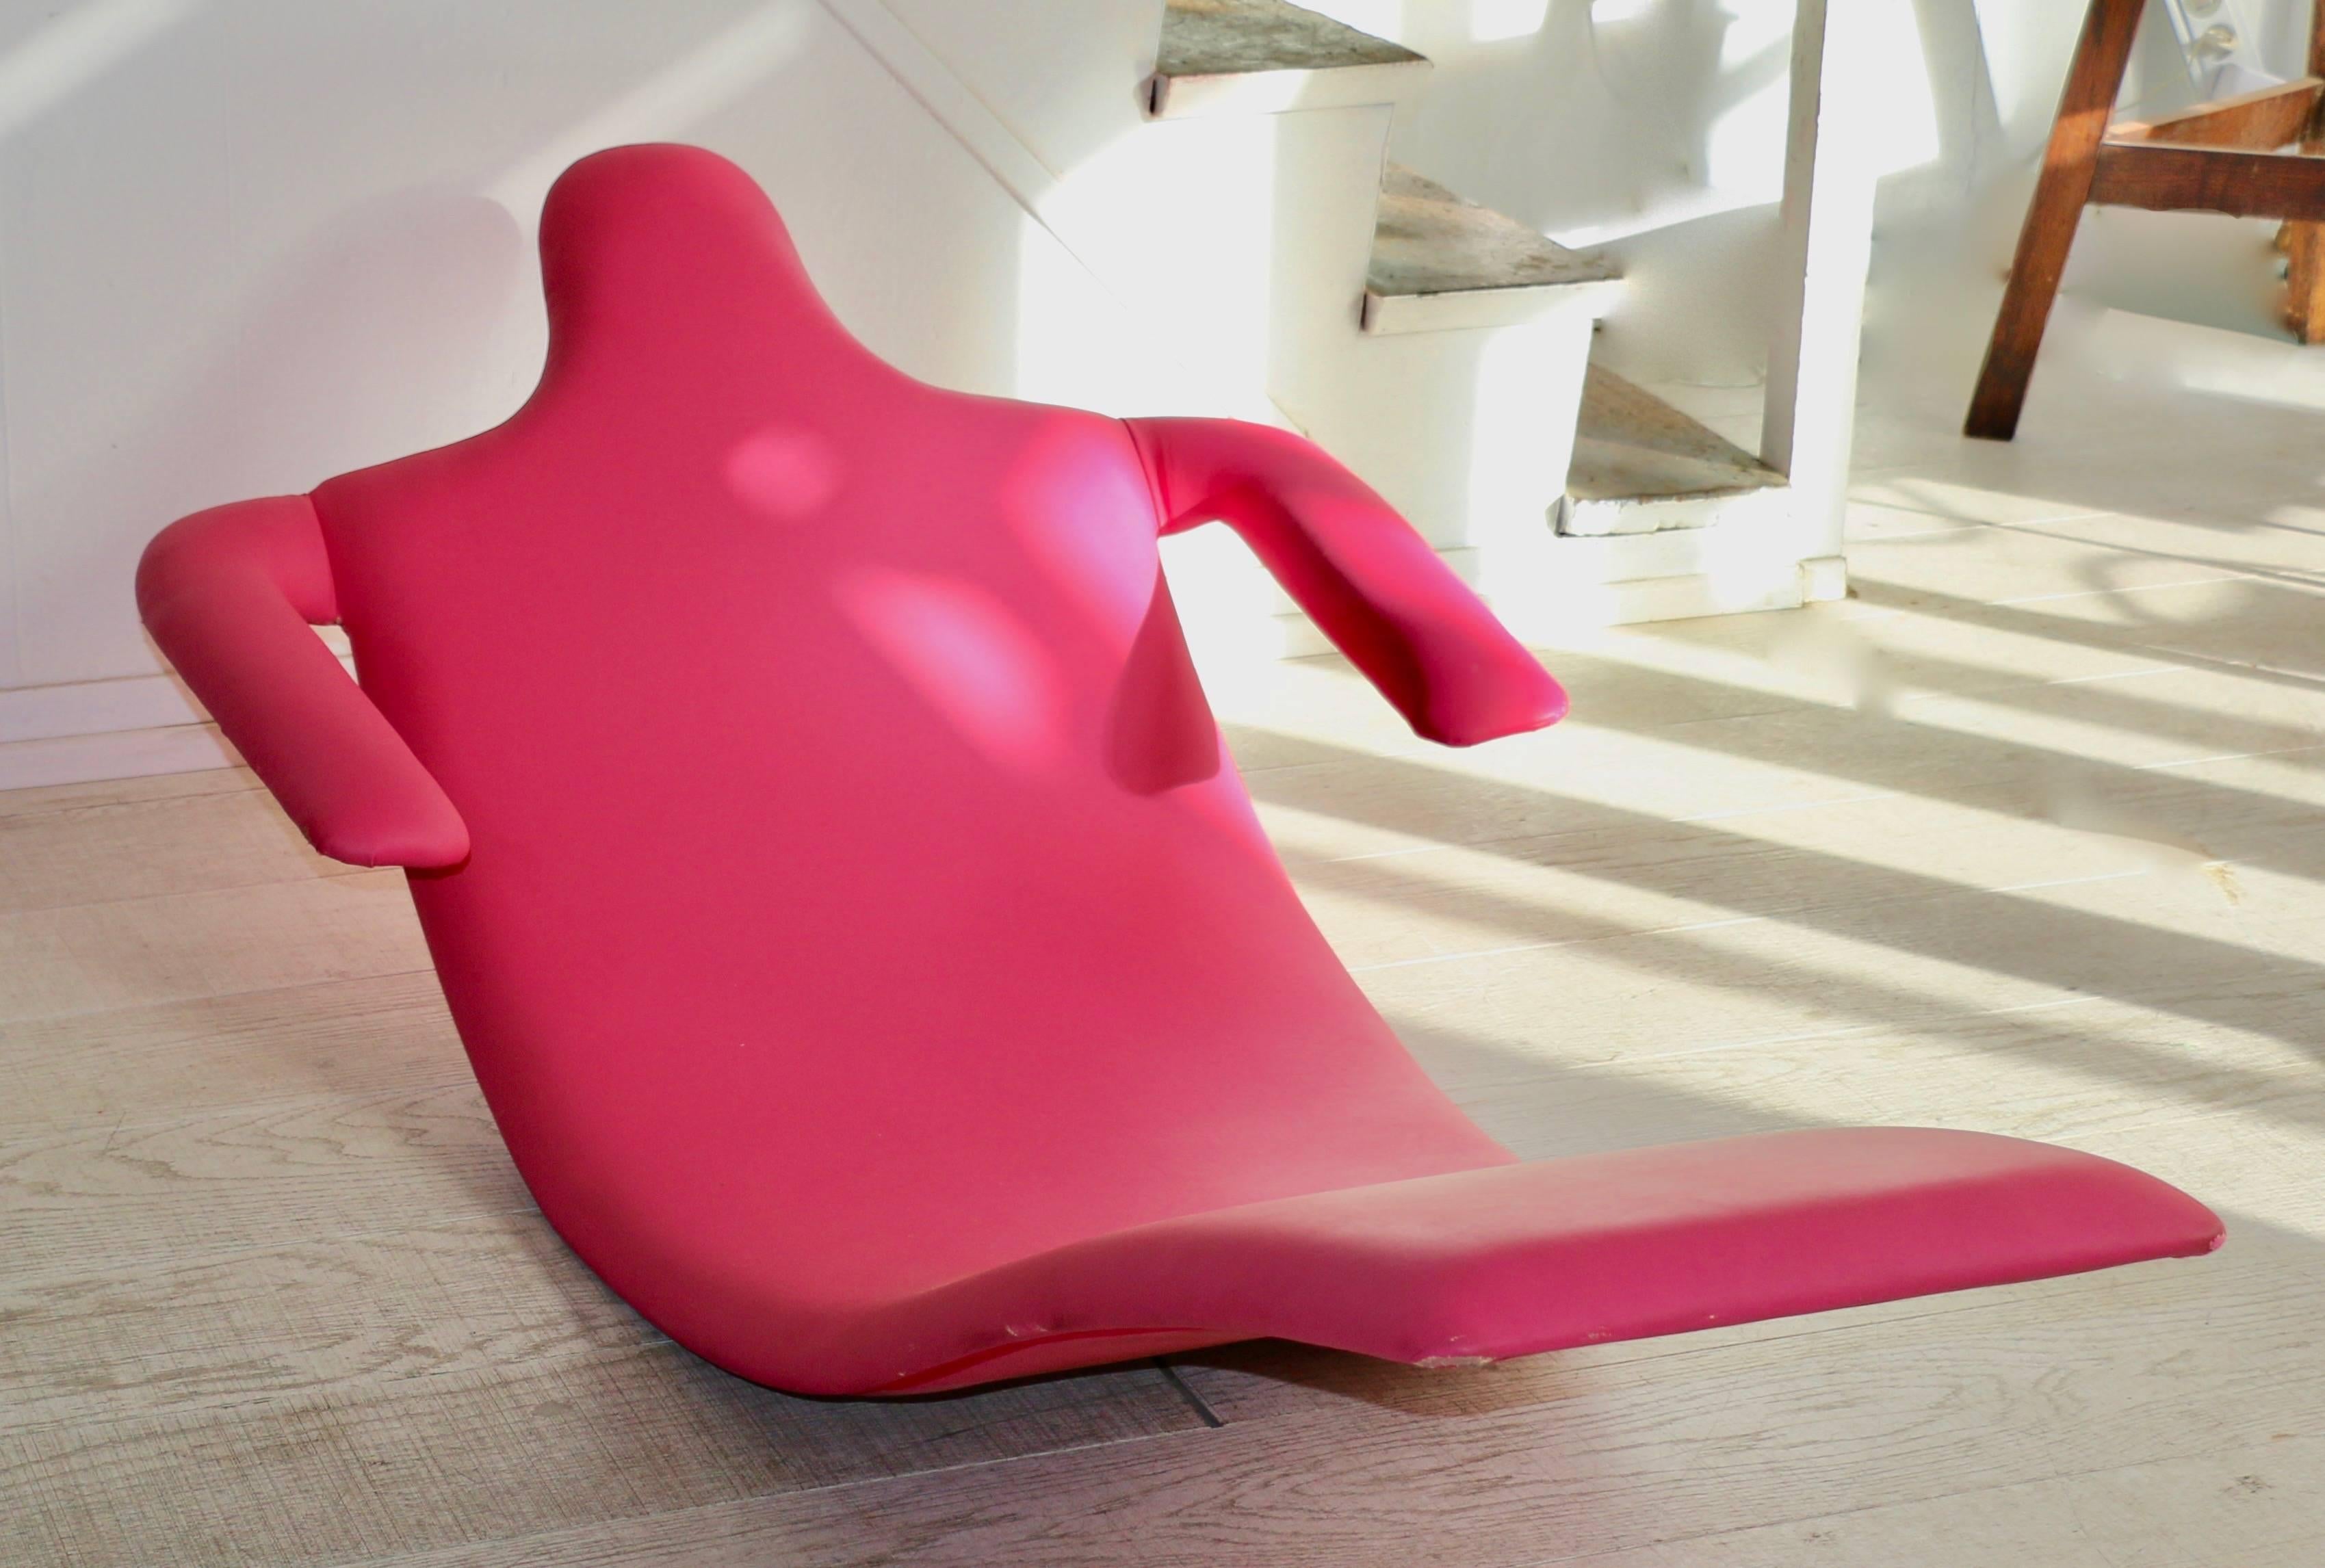 1990s amusing lounge chair with an anthropomorphic shape in pink skai.